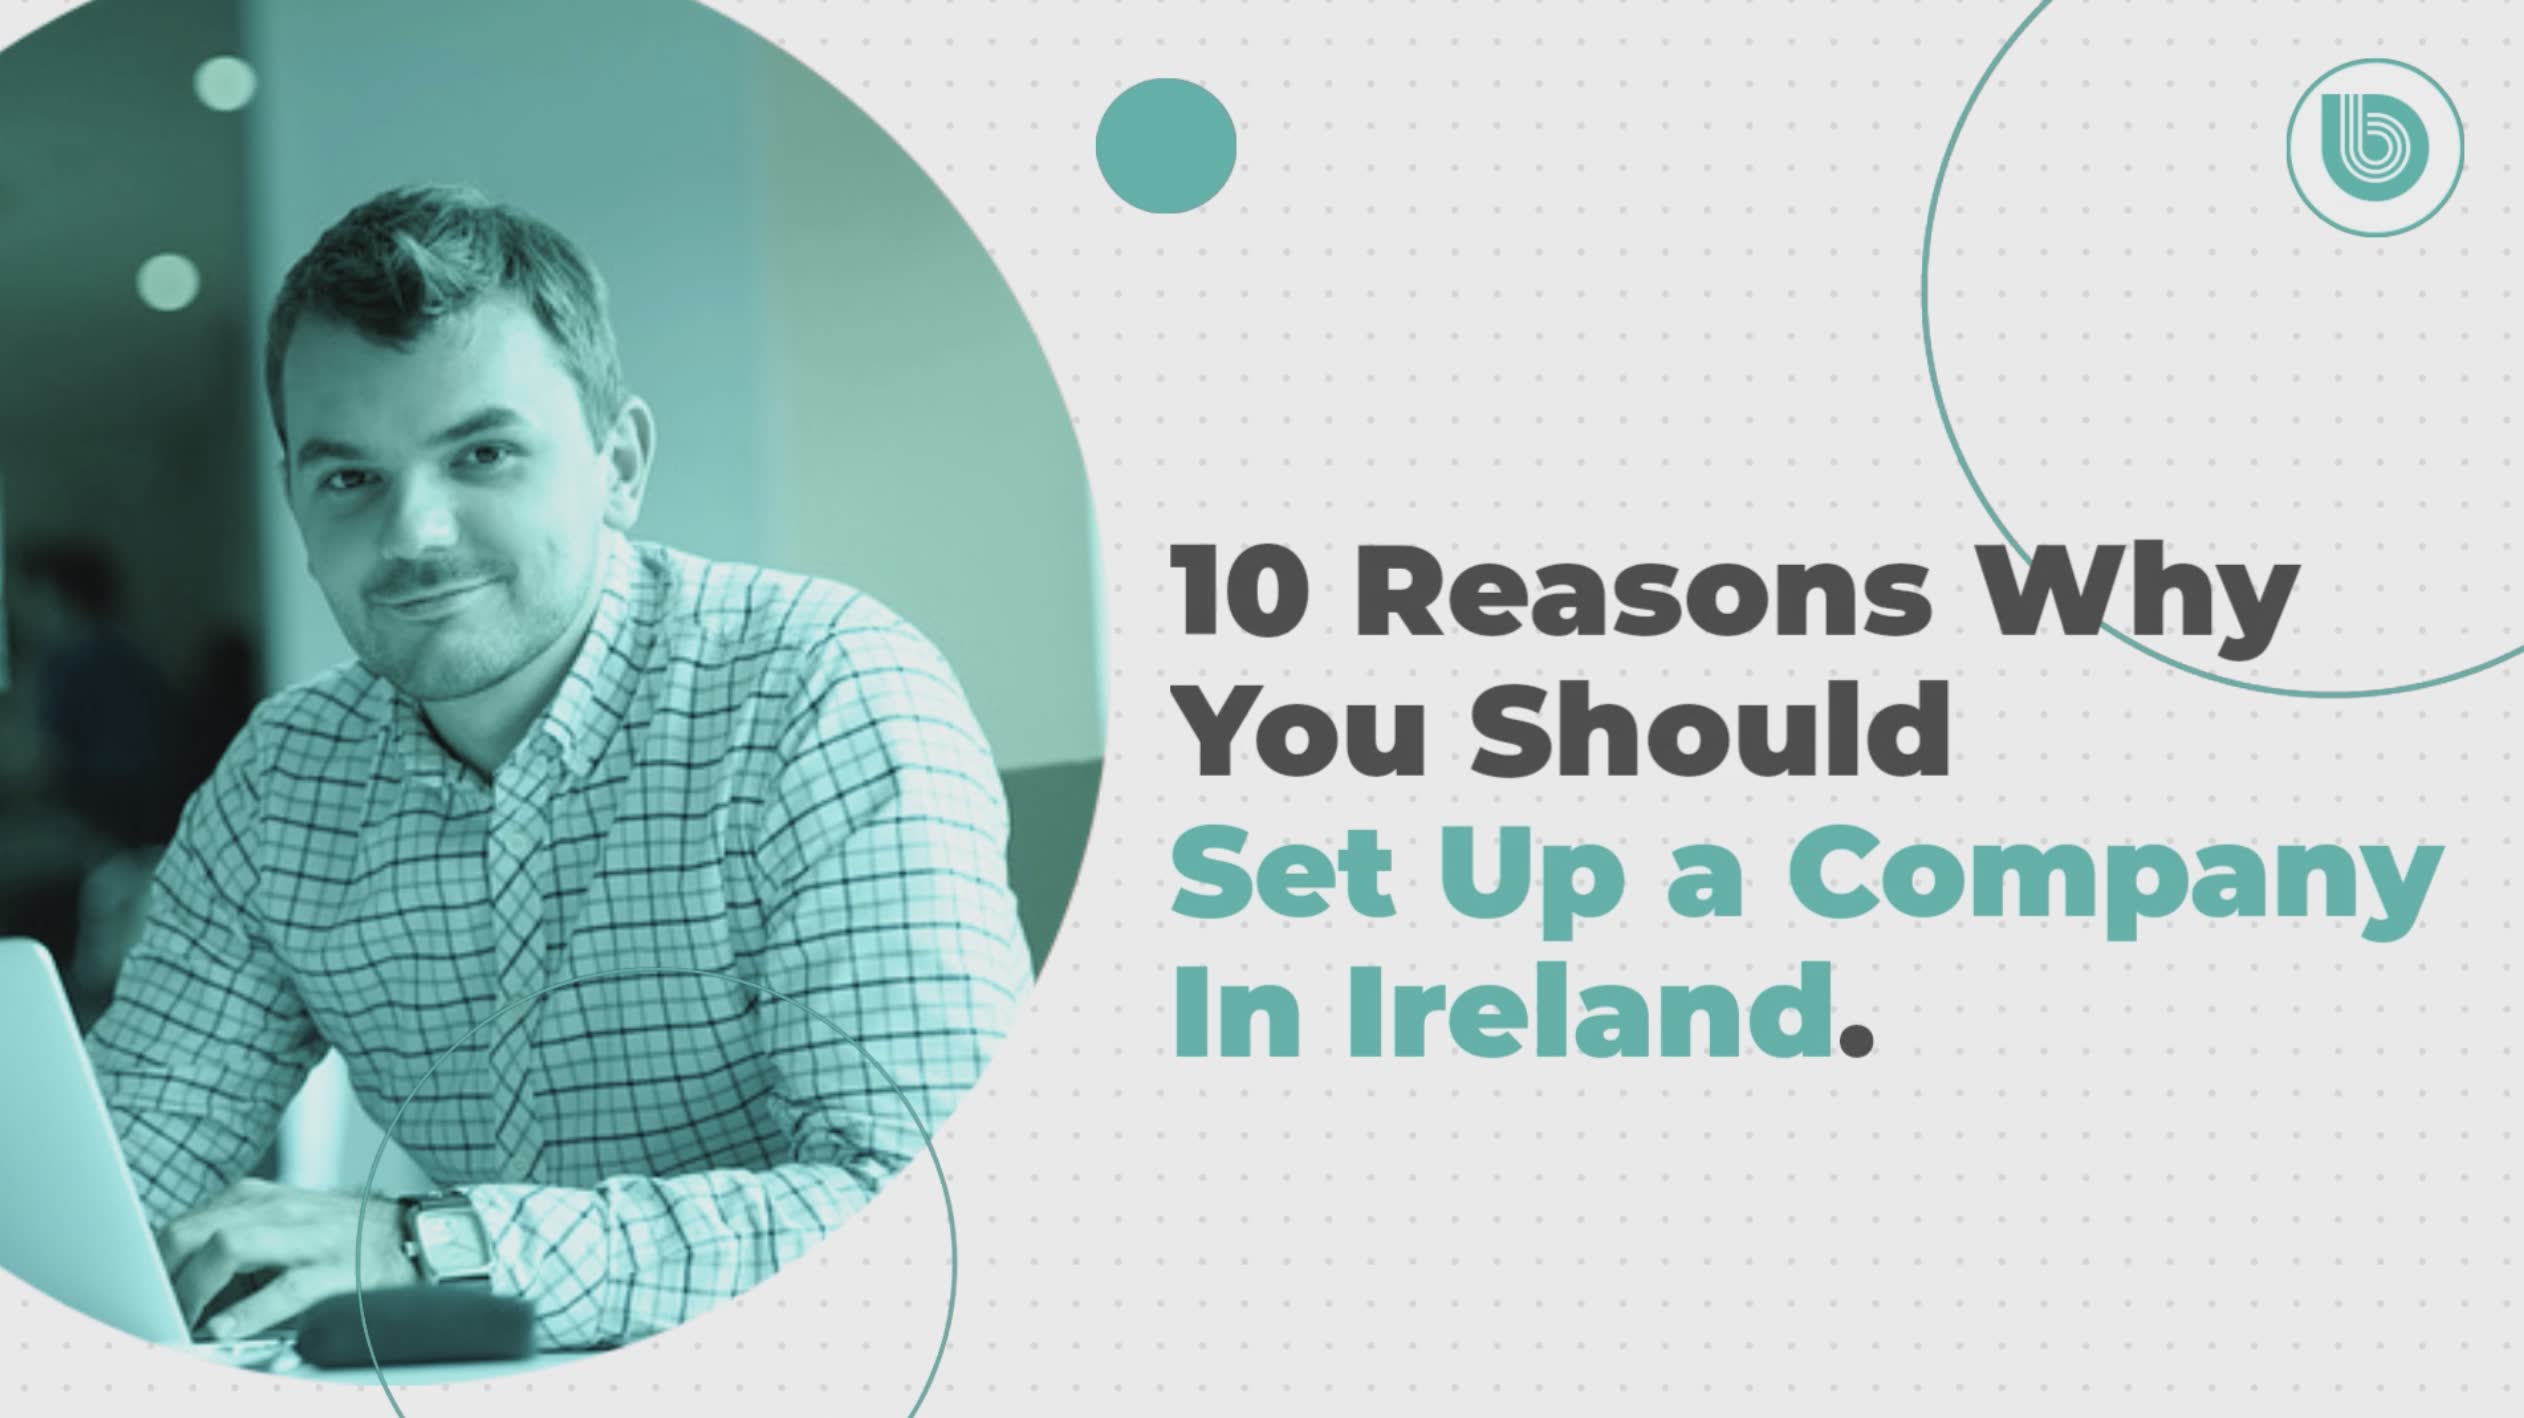 11 Benefits of Company Formation in Ireland for Overseas Business: A Guide to Tax Benefits and More 14